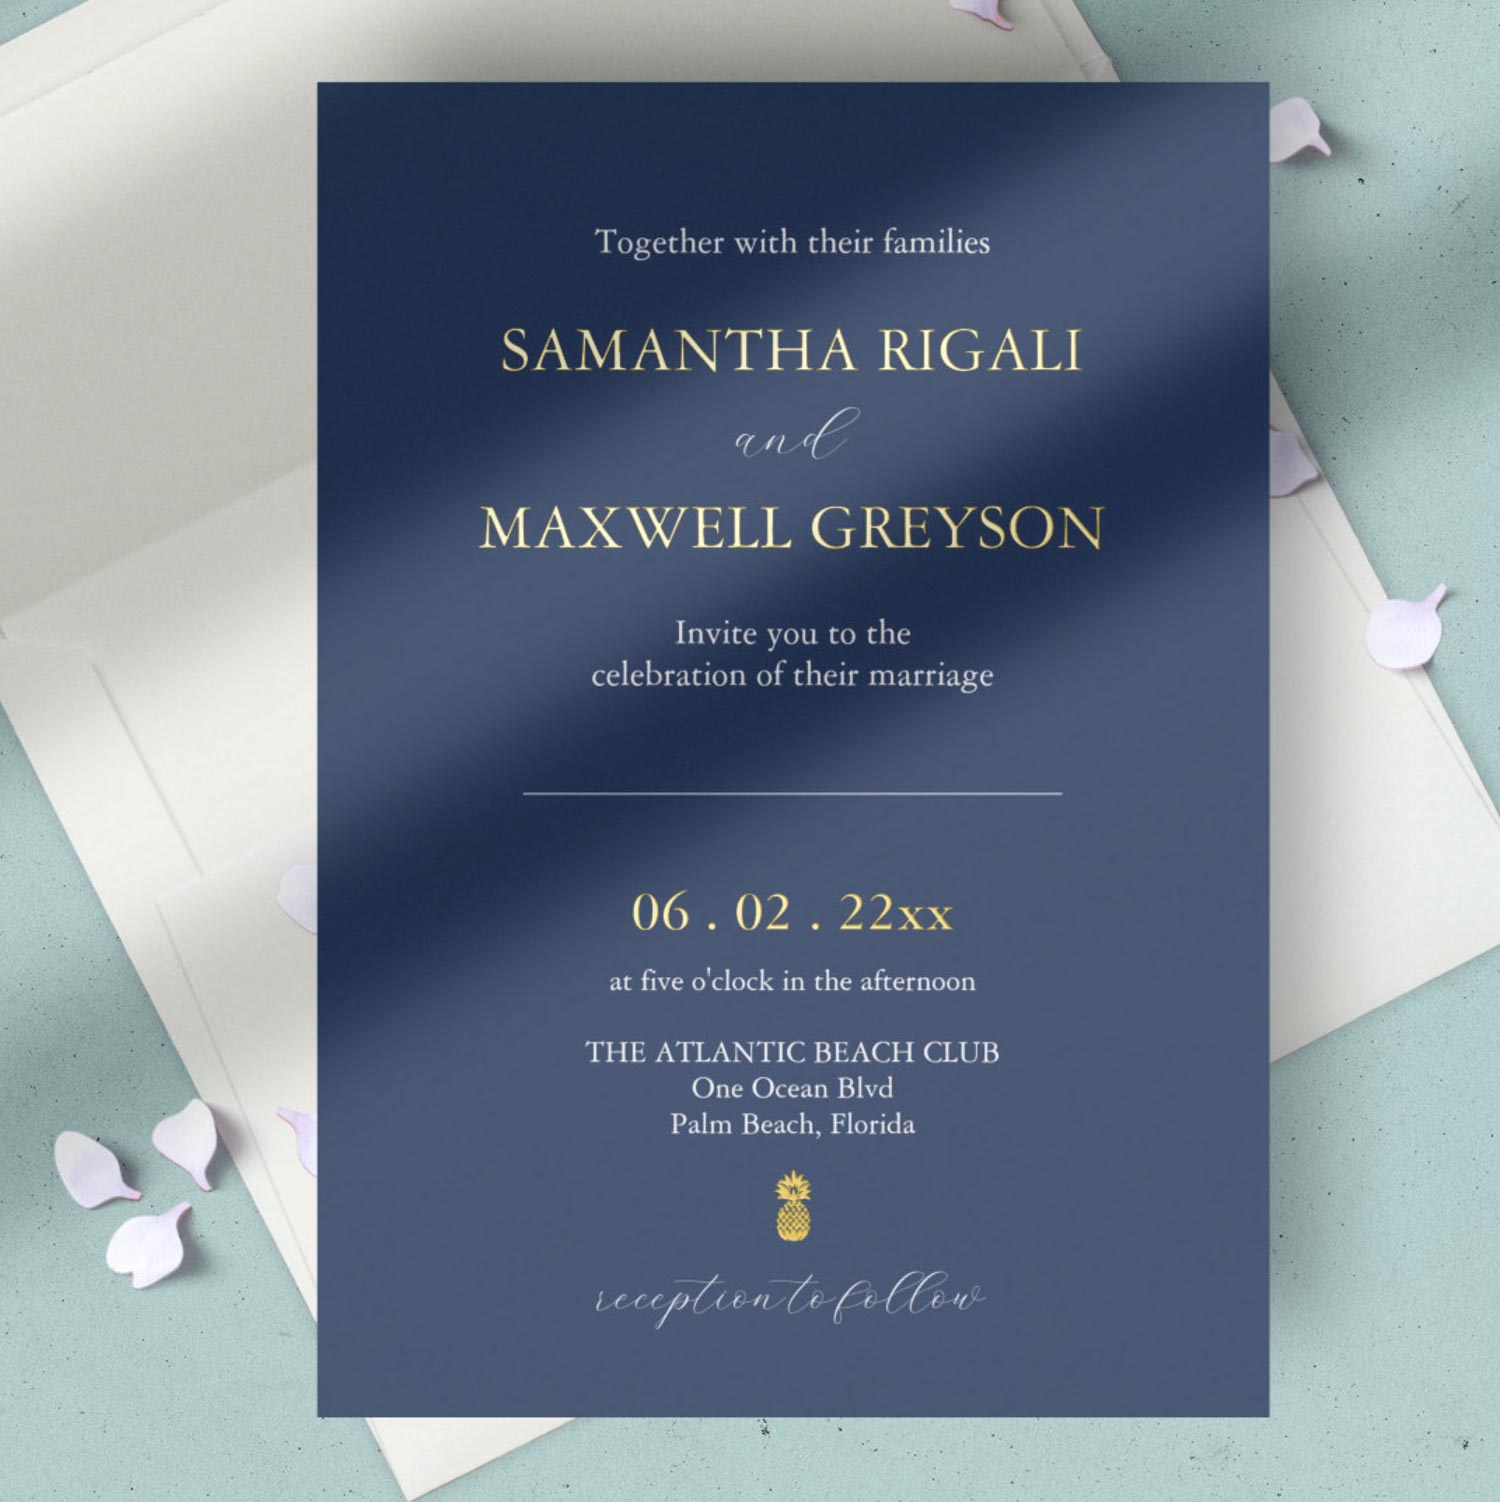 Equal Partnership Style: "[Bride's Full Name]
and
[Groom's Full Name]
joyfully invite you to their wedding
on [Date]
at [Venue]
[Address]
[City, State]
Celebration to follow"